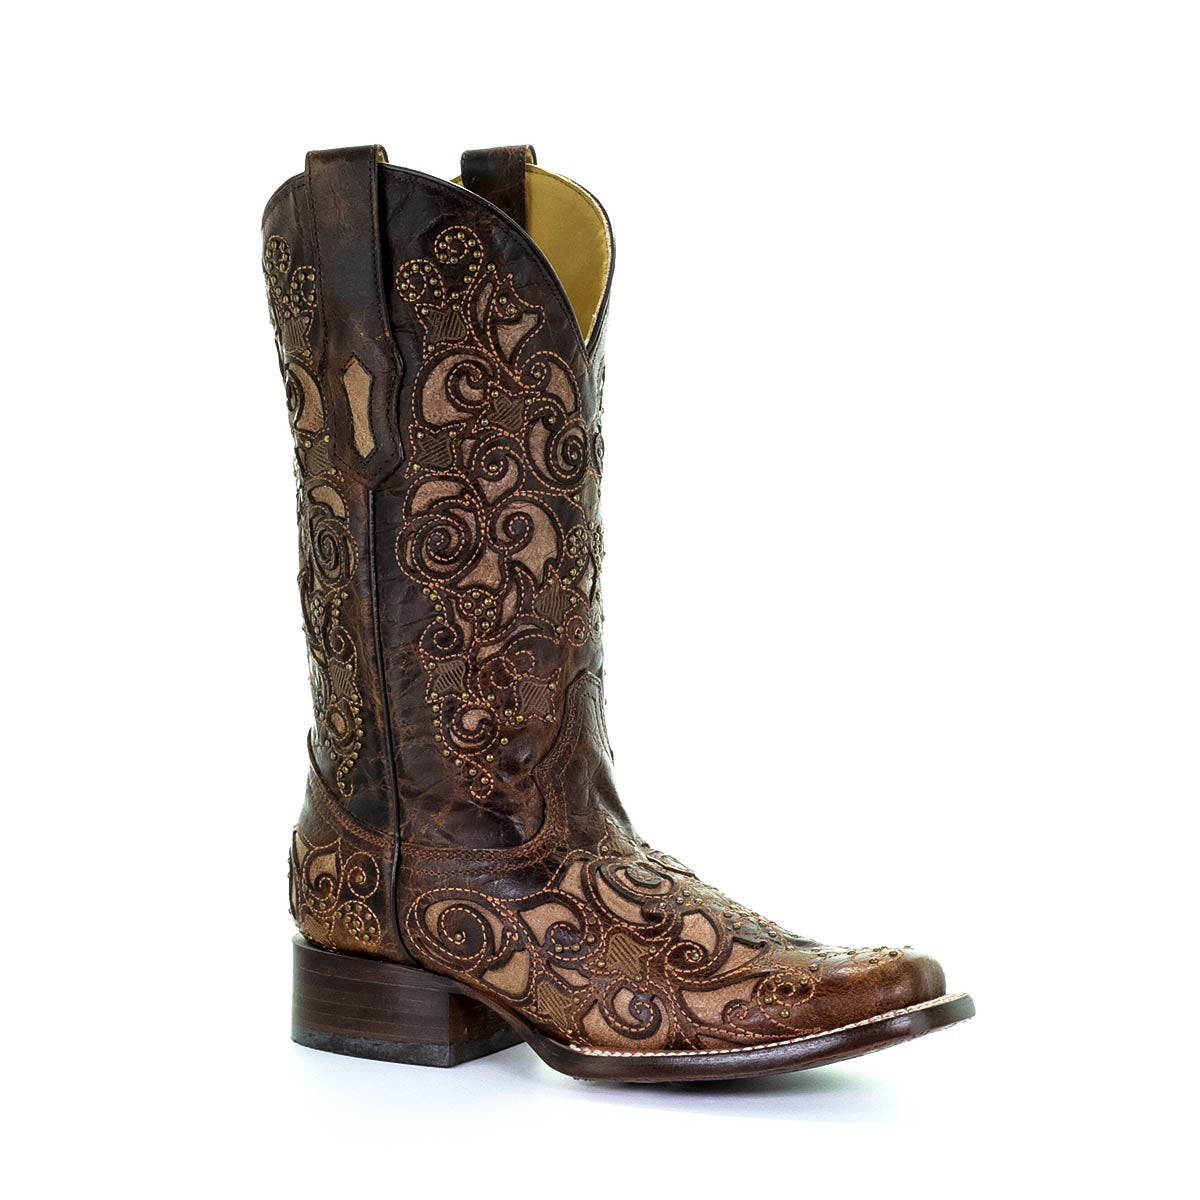 Corral Women's Brown Inlay, Studs, and Embroidery Square Toe Western Boot